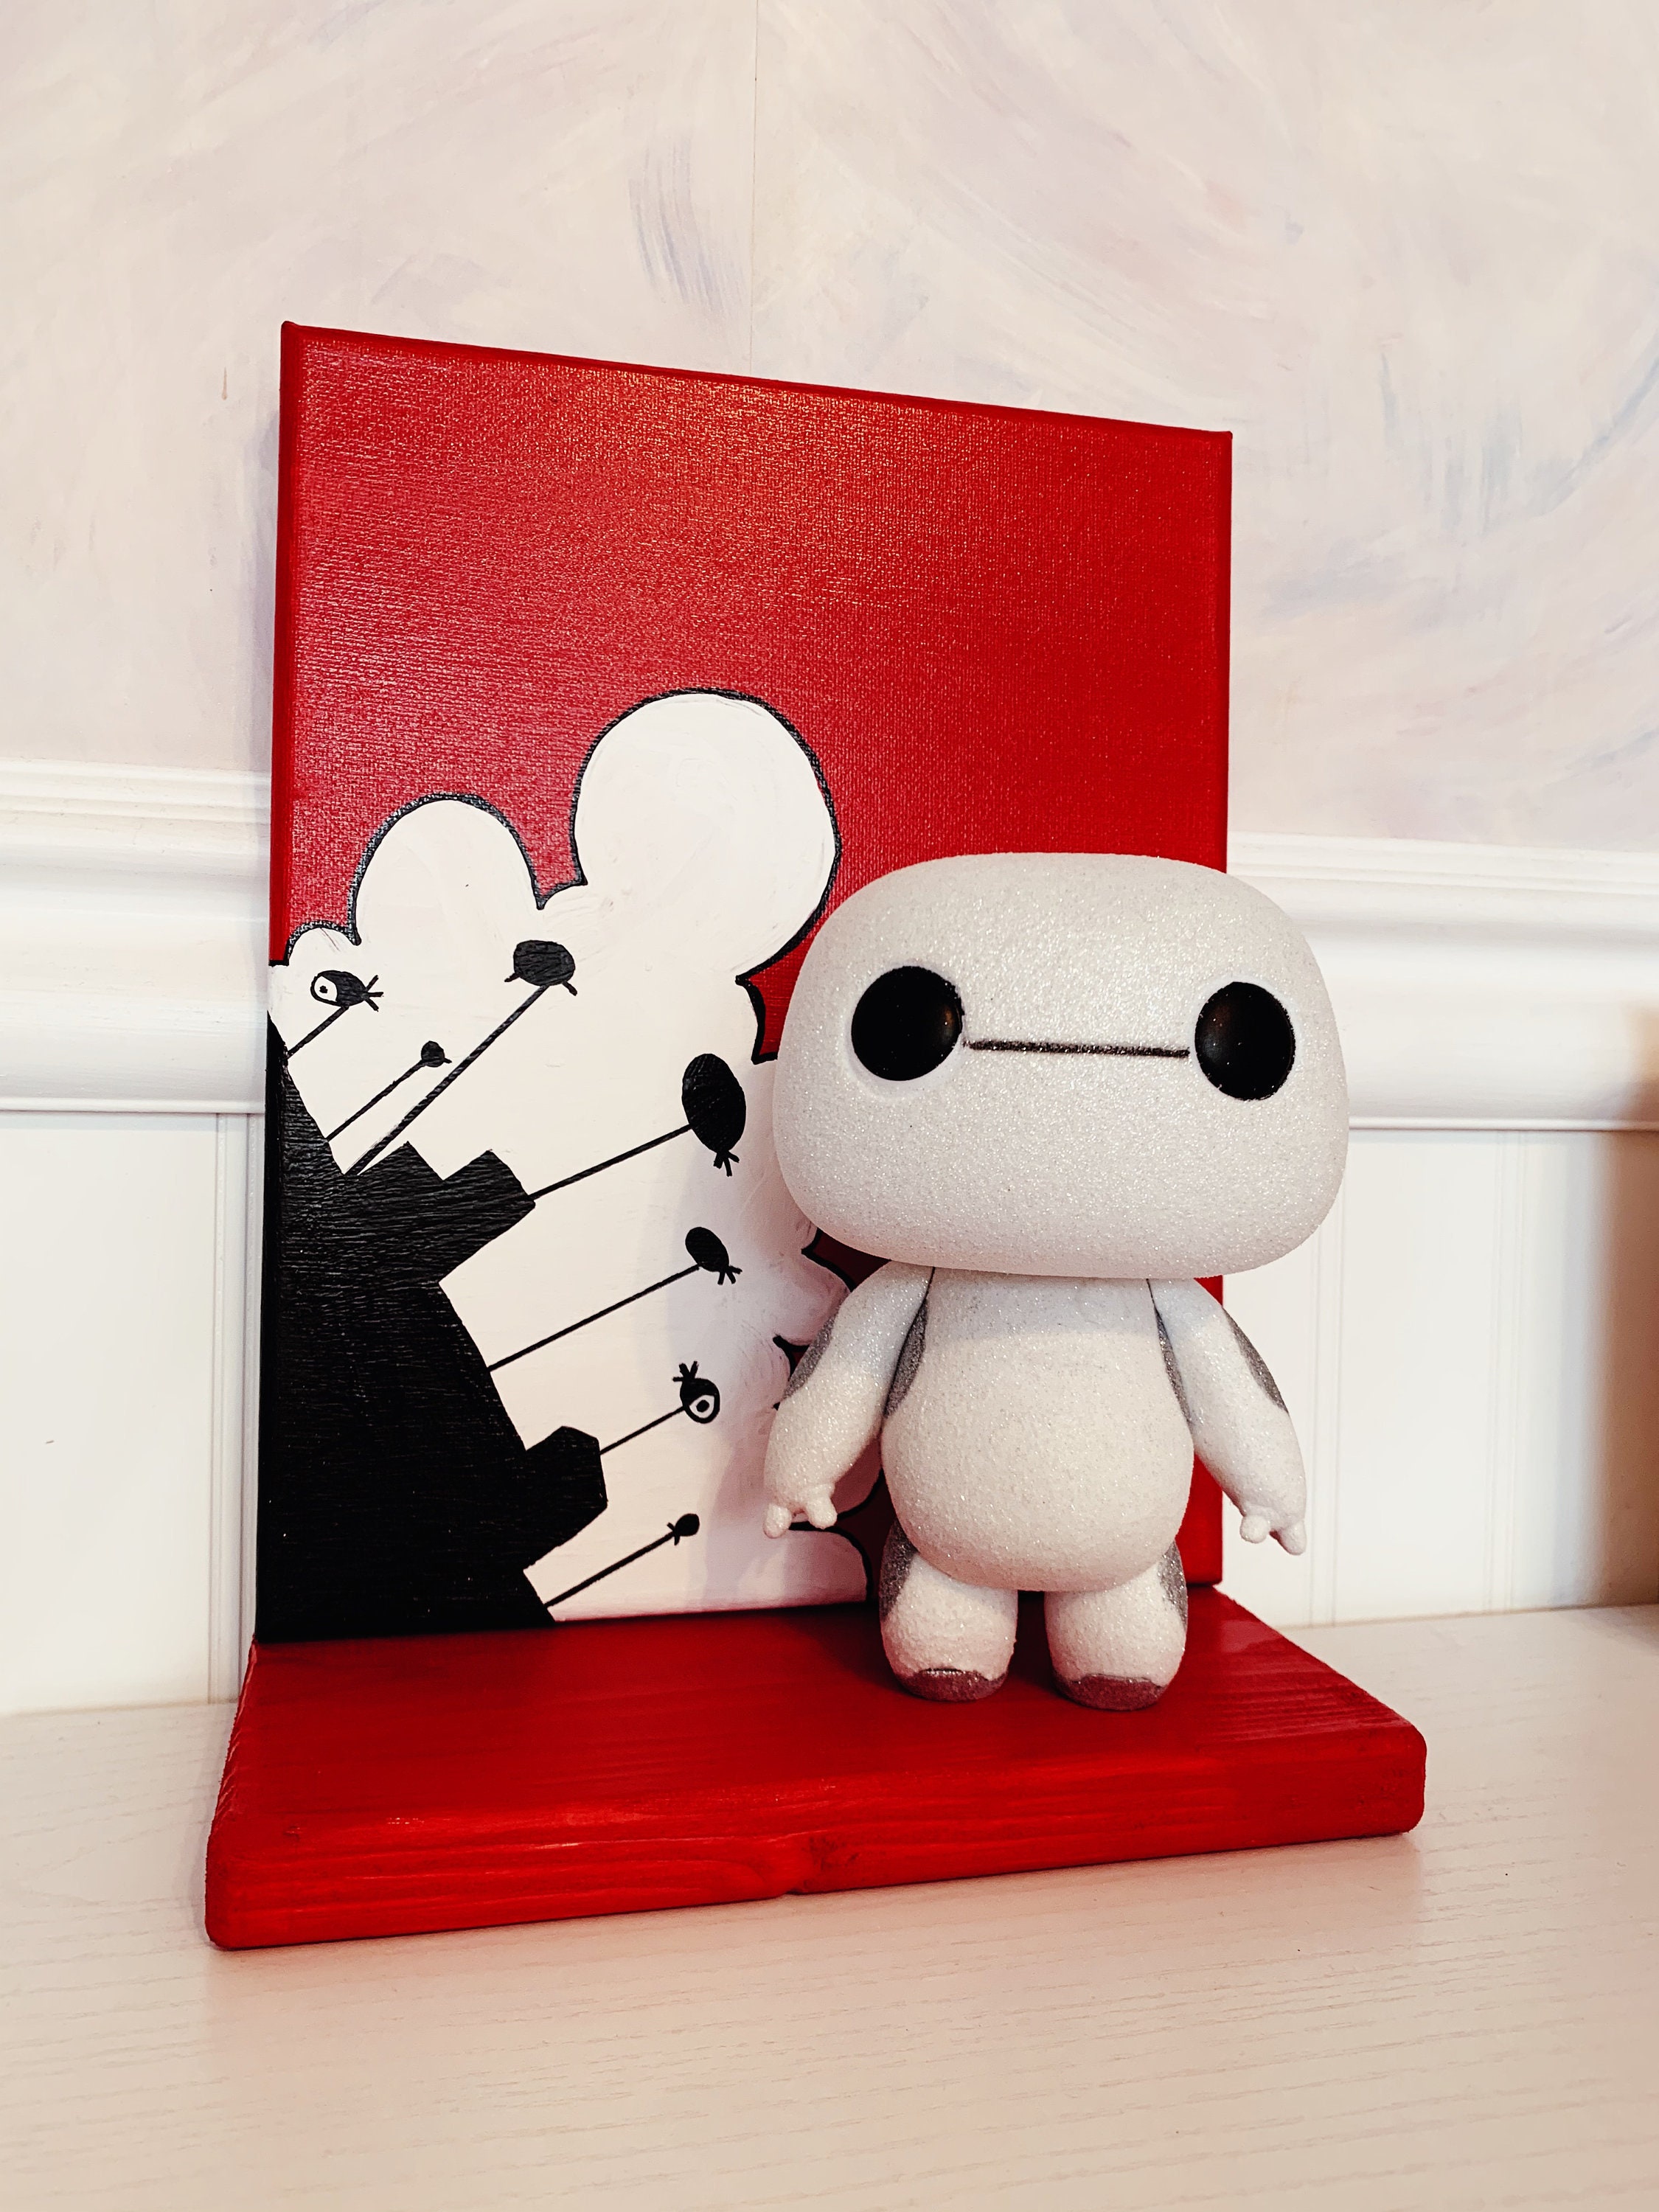 Datter Cordelia Overskyet Funko Pop Hand-painted Wall or Shelf Display Baymax - Etsy